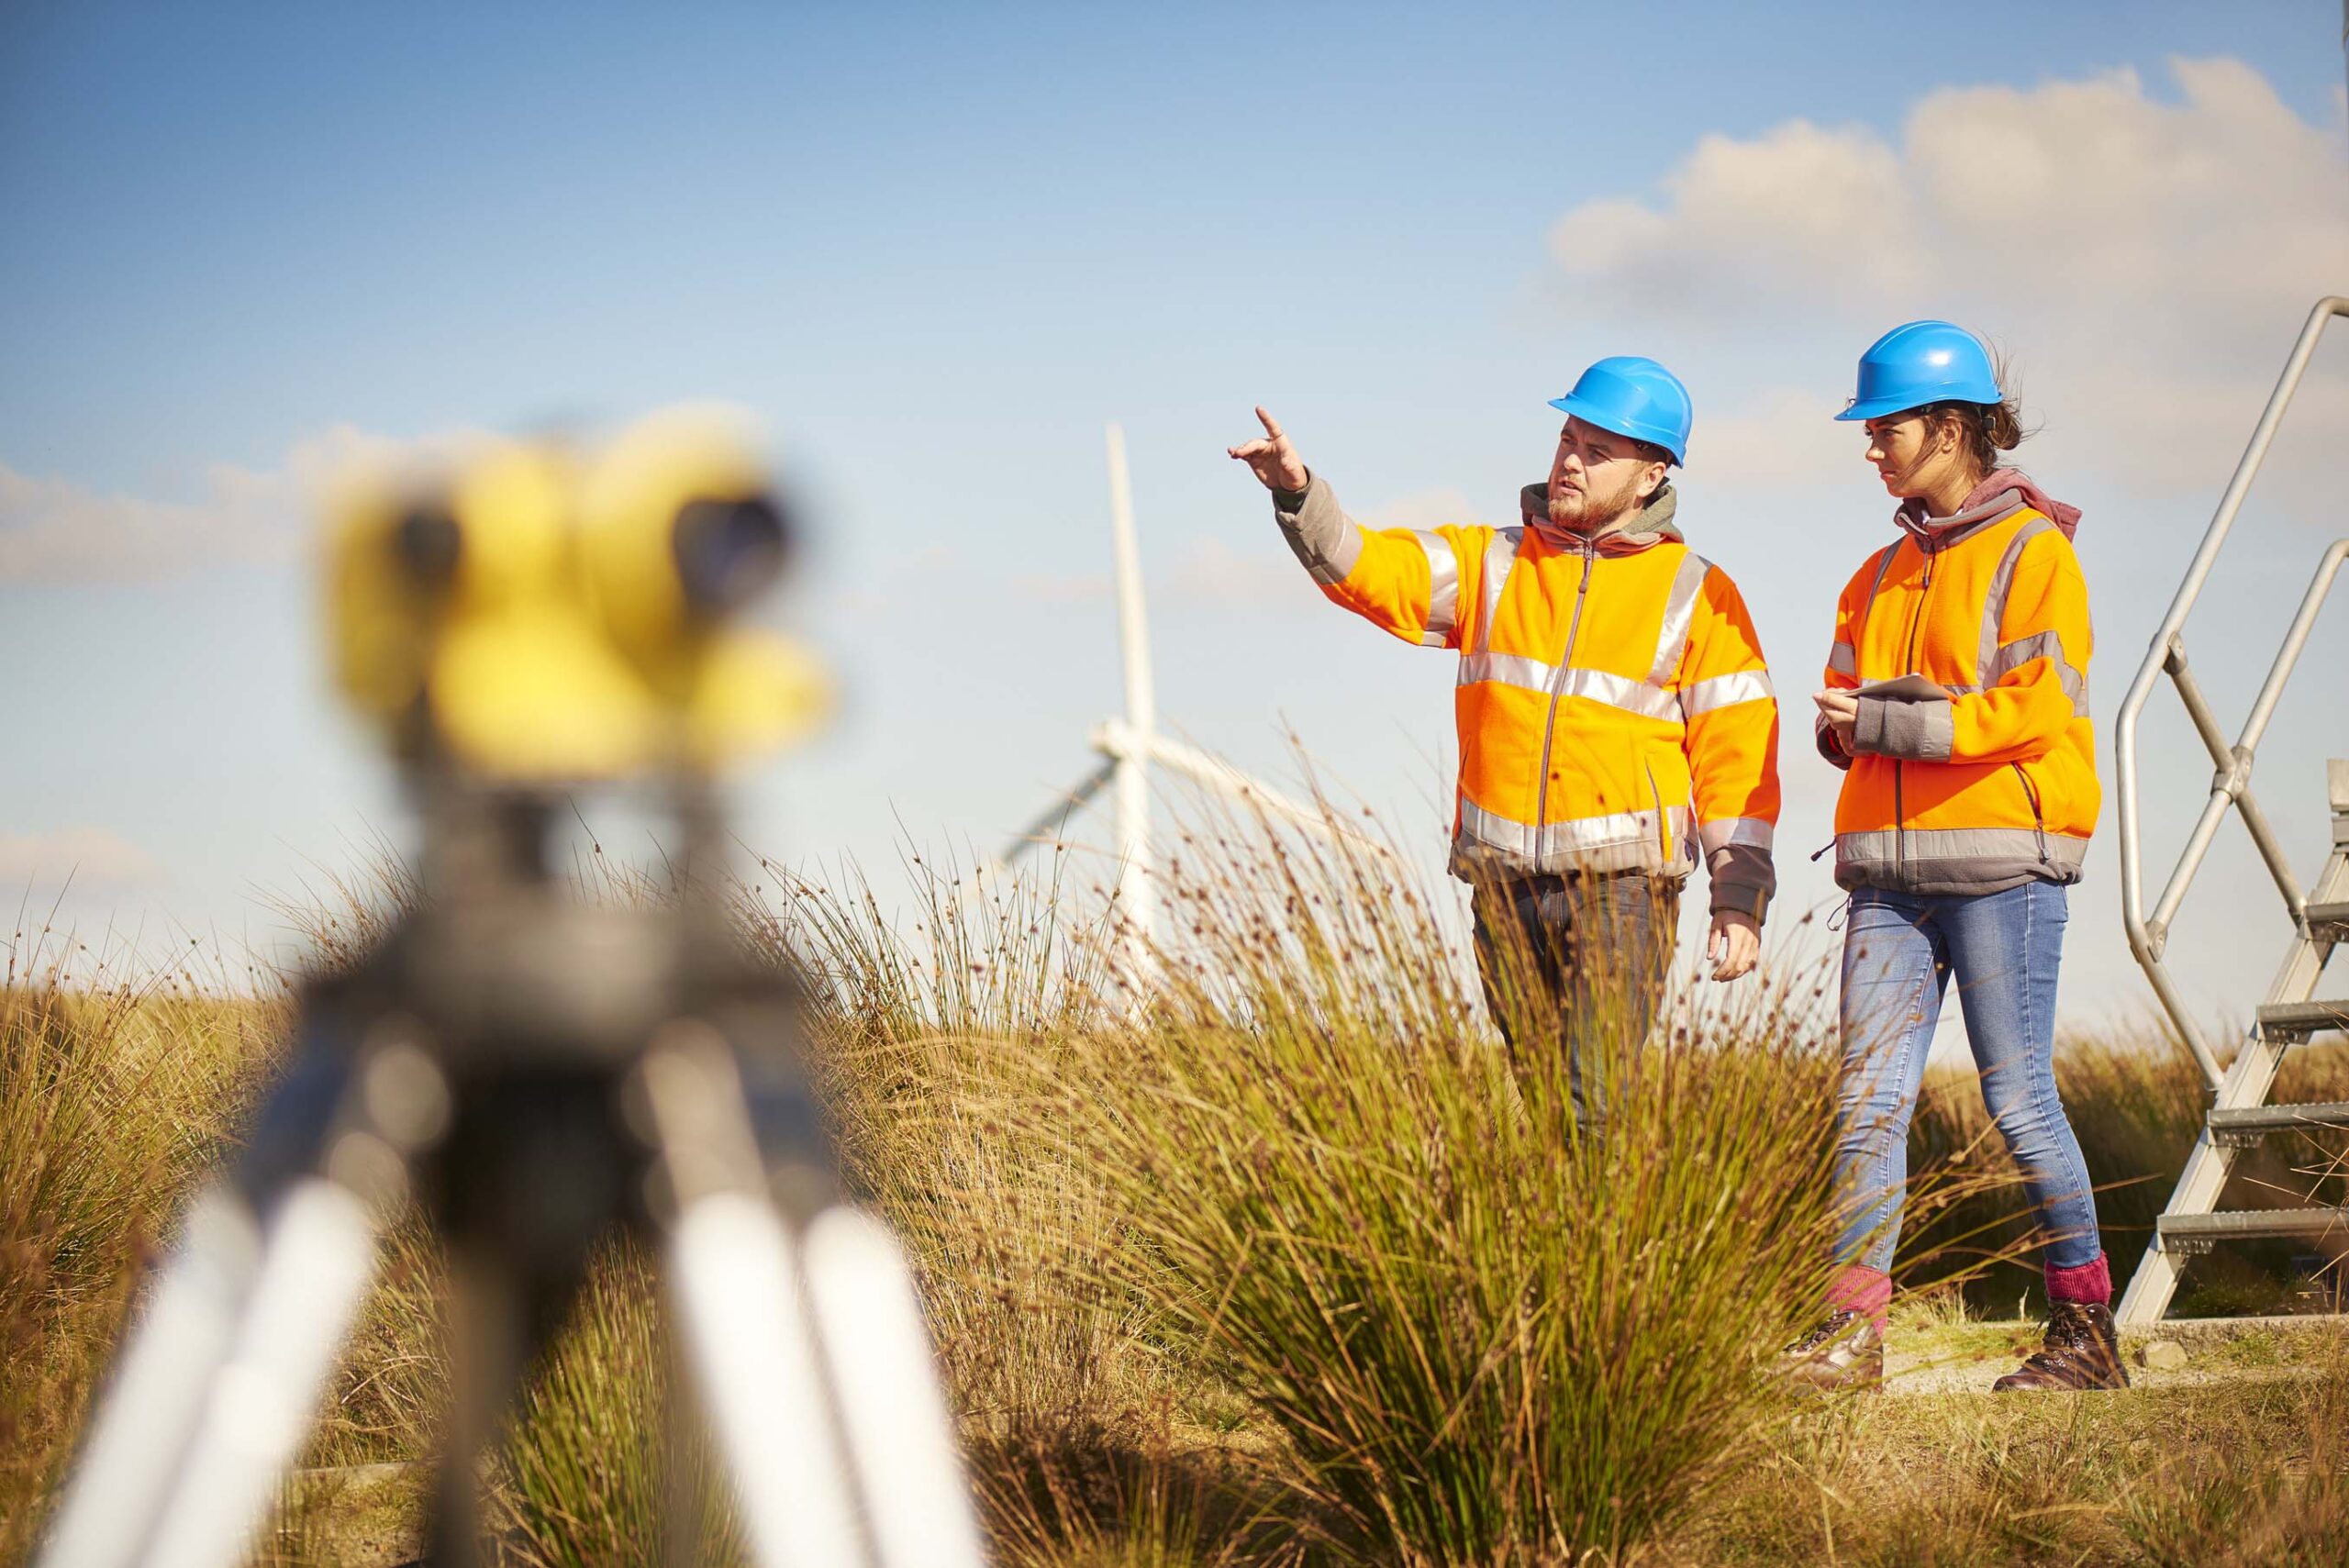 Sage Service Operations brings field workforce management capabilities